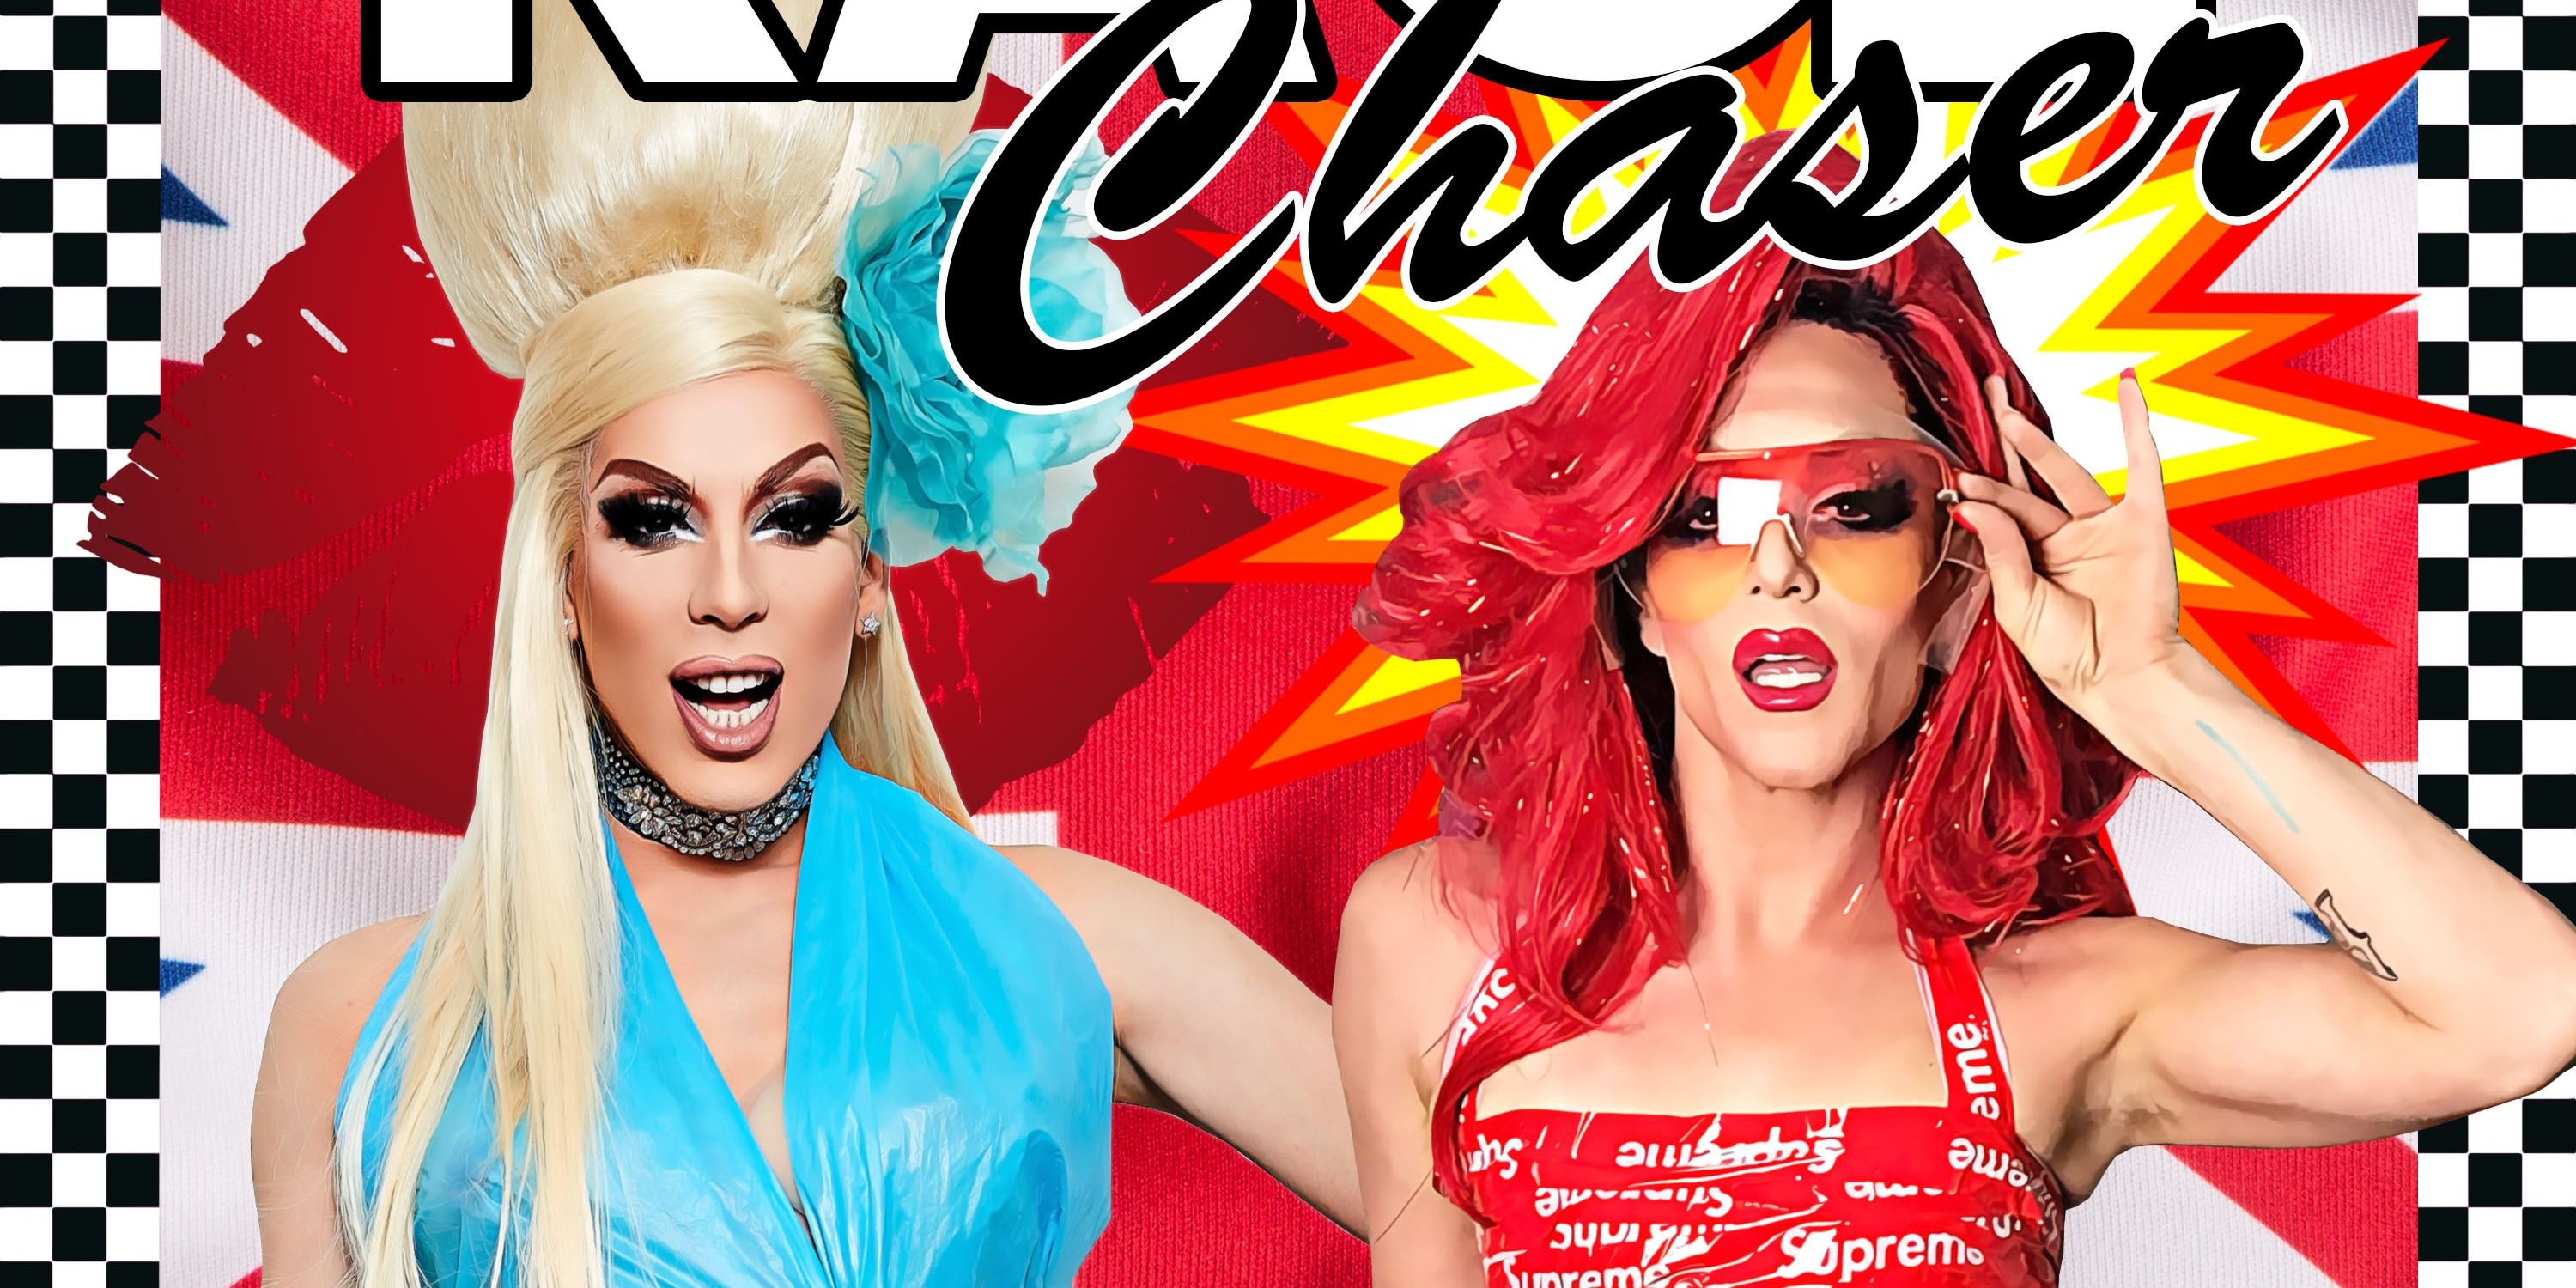 RuPaul’s Drag Race 10 Best Related Podcasts All Fans Should Listen To